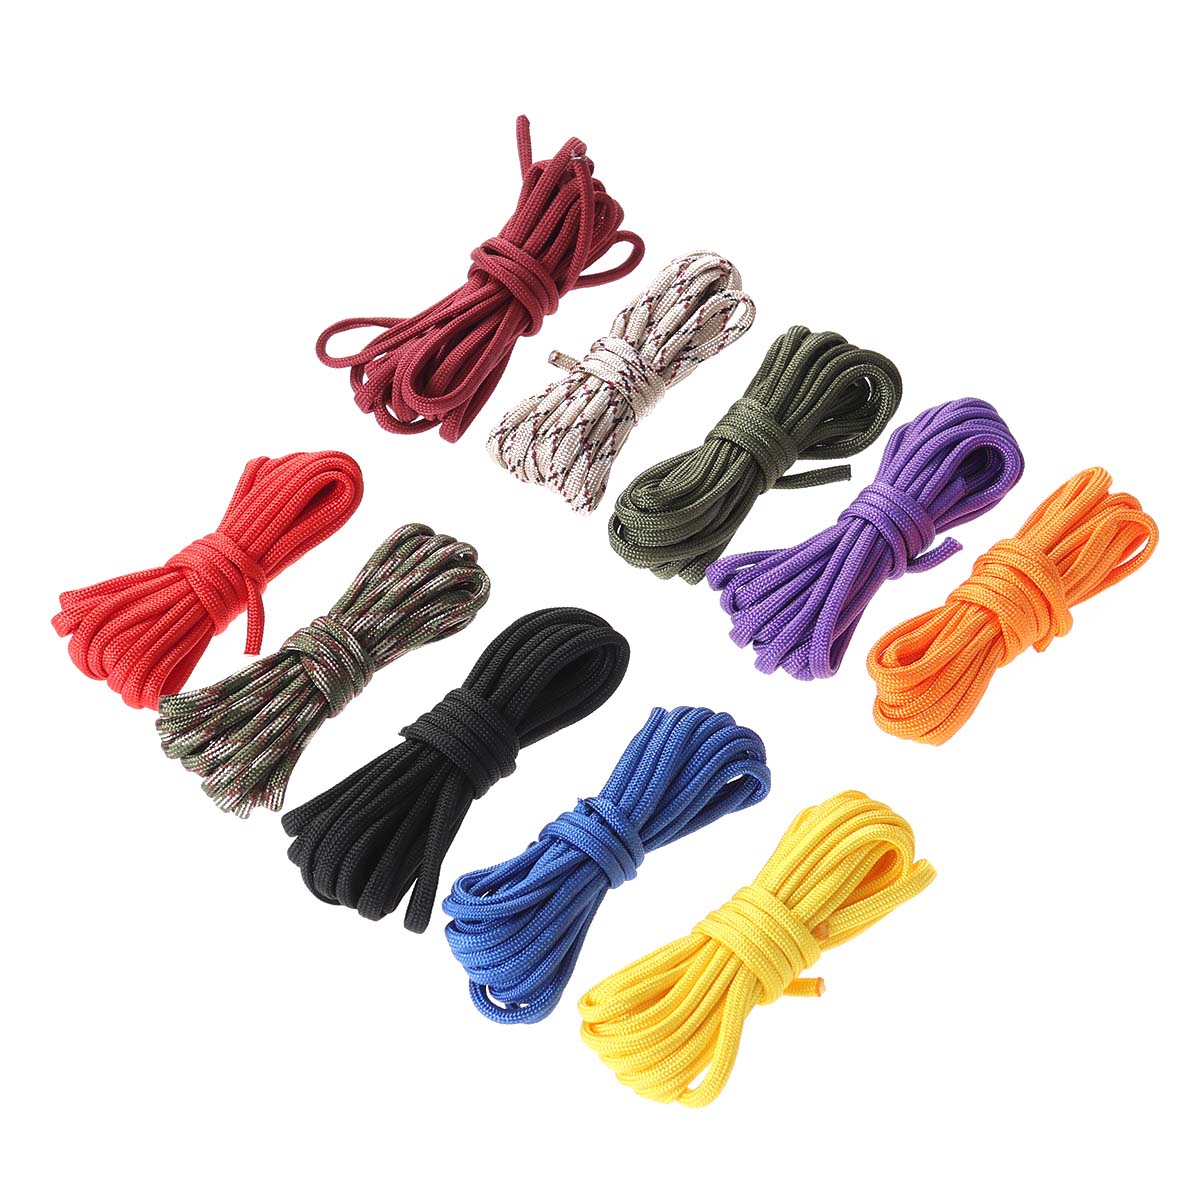 10-pack of 3m Paracord Climbing Ropes